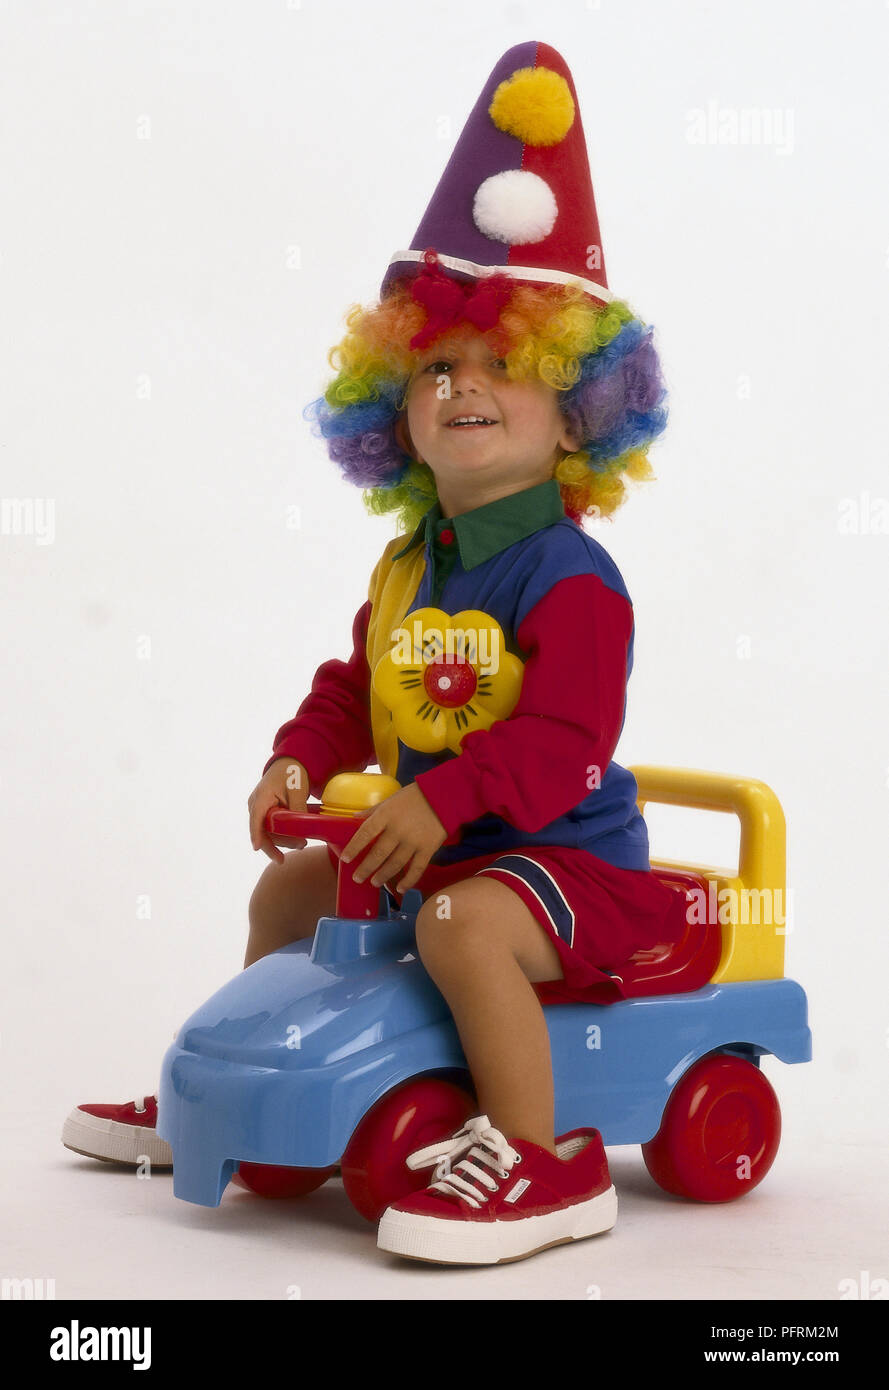 Smiling toddler wearing clown hat and multi coloured wig and oversized canvas shoes sitting on toy car Stock Photo